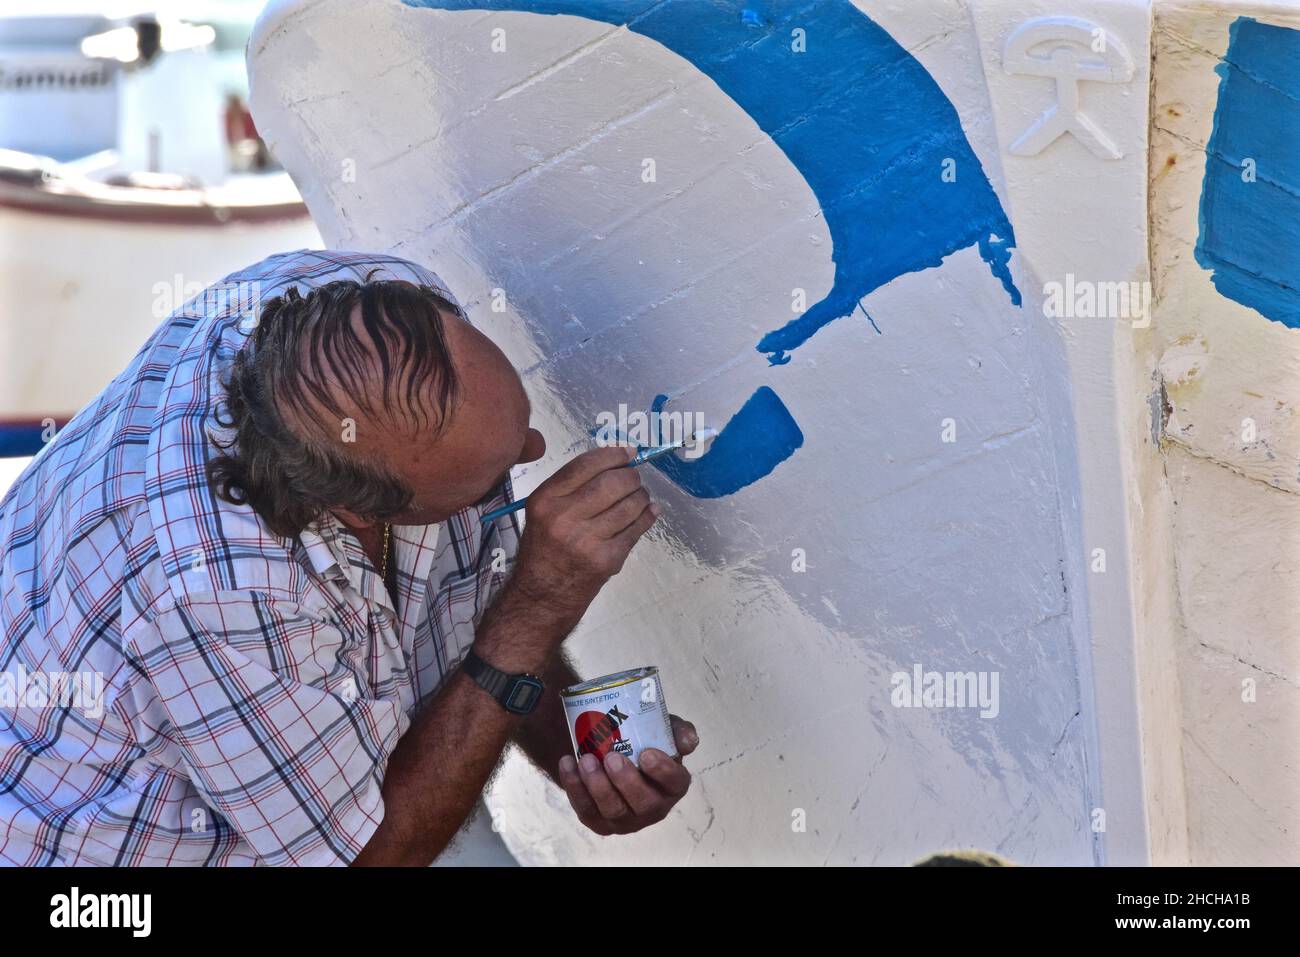 Man with thinning hair paints bow of boat with white and blue paint Stock Photo